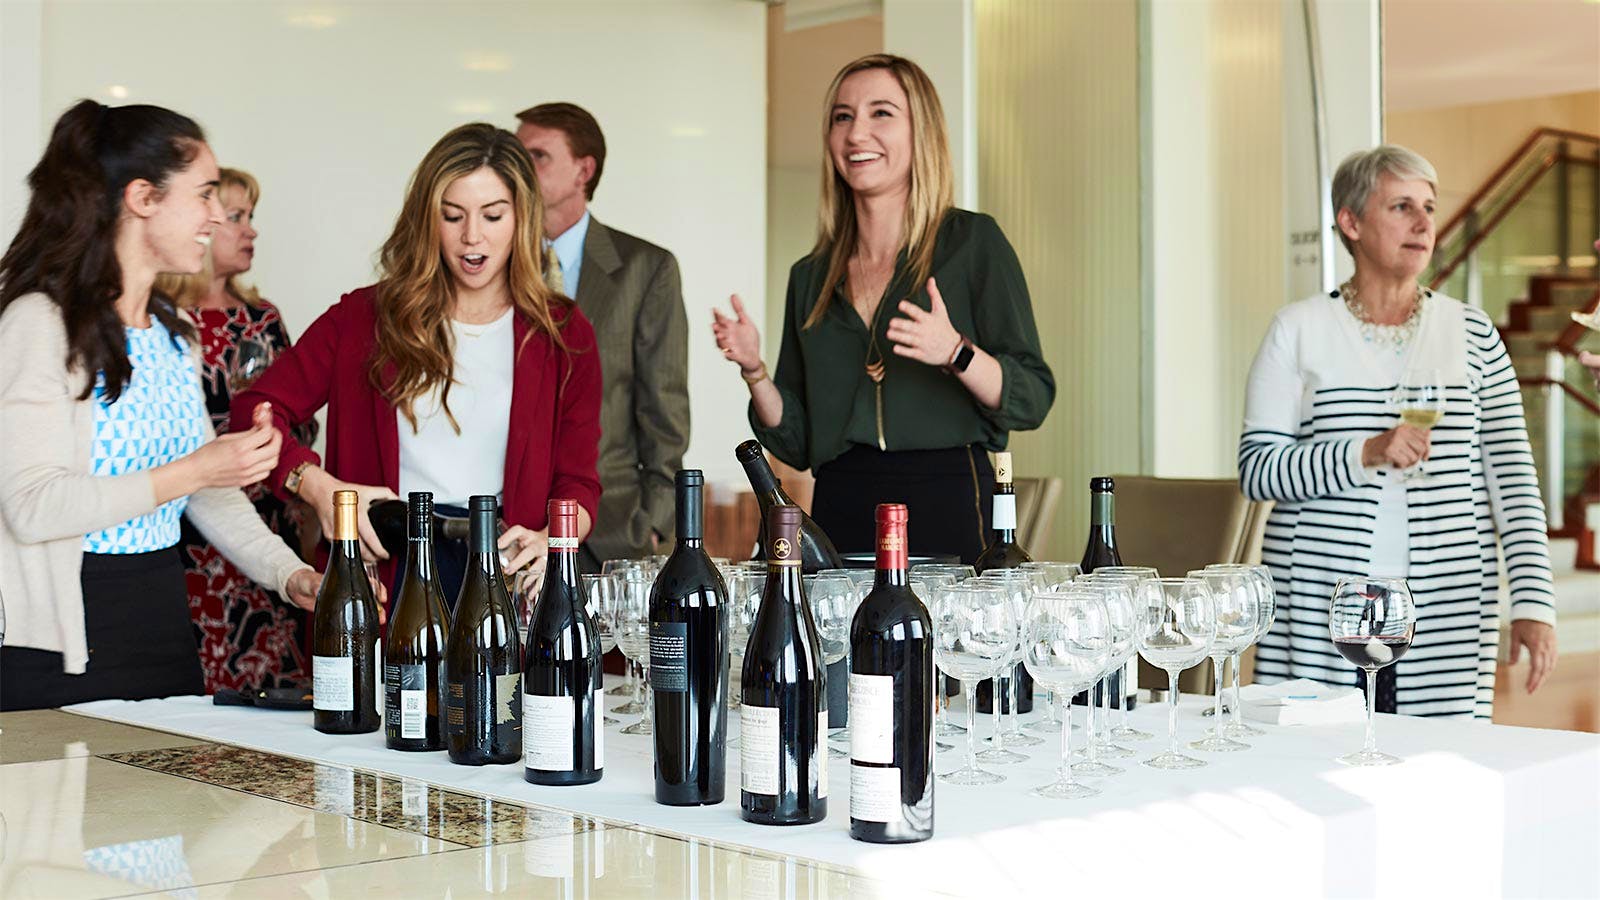 Group of law firm employees gathered for a wine tasting, with bottles and glasses on a table.